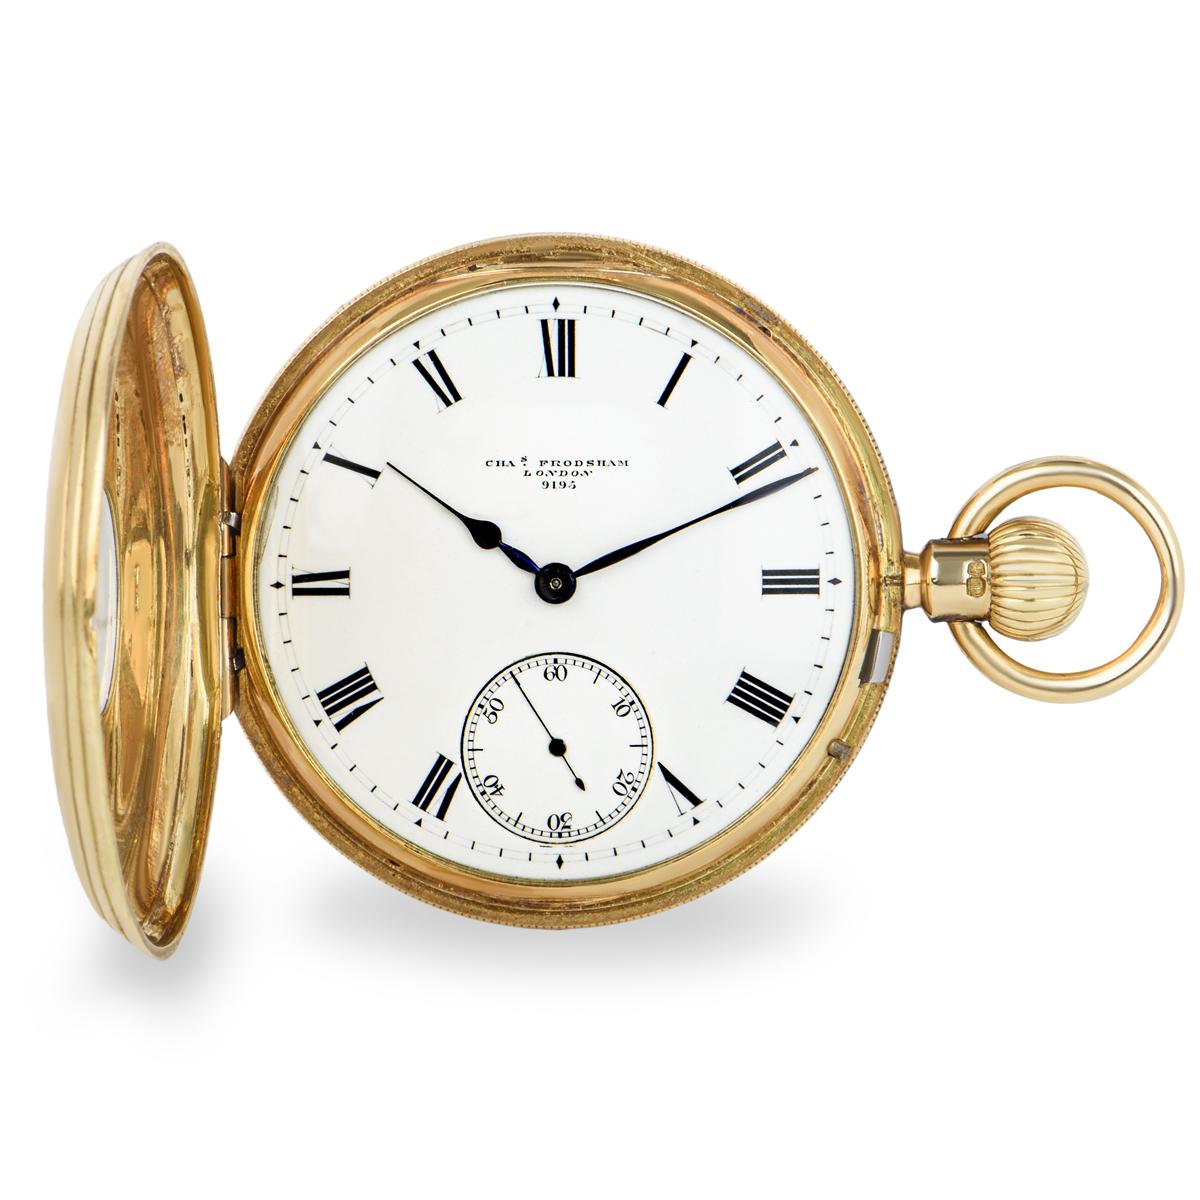 Arnold & Charles Frodsham Rare 18ct Yellow Gold Keyless Fusee Lever Enamel Half Hunter Pocket Watch C1905.

Dial: The perfect fully signed and numbered white enamel dial with Roman Numerals outer minute track and subsidiary seconds dial with an